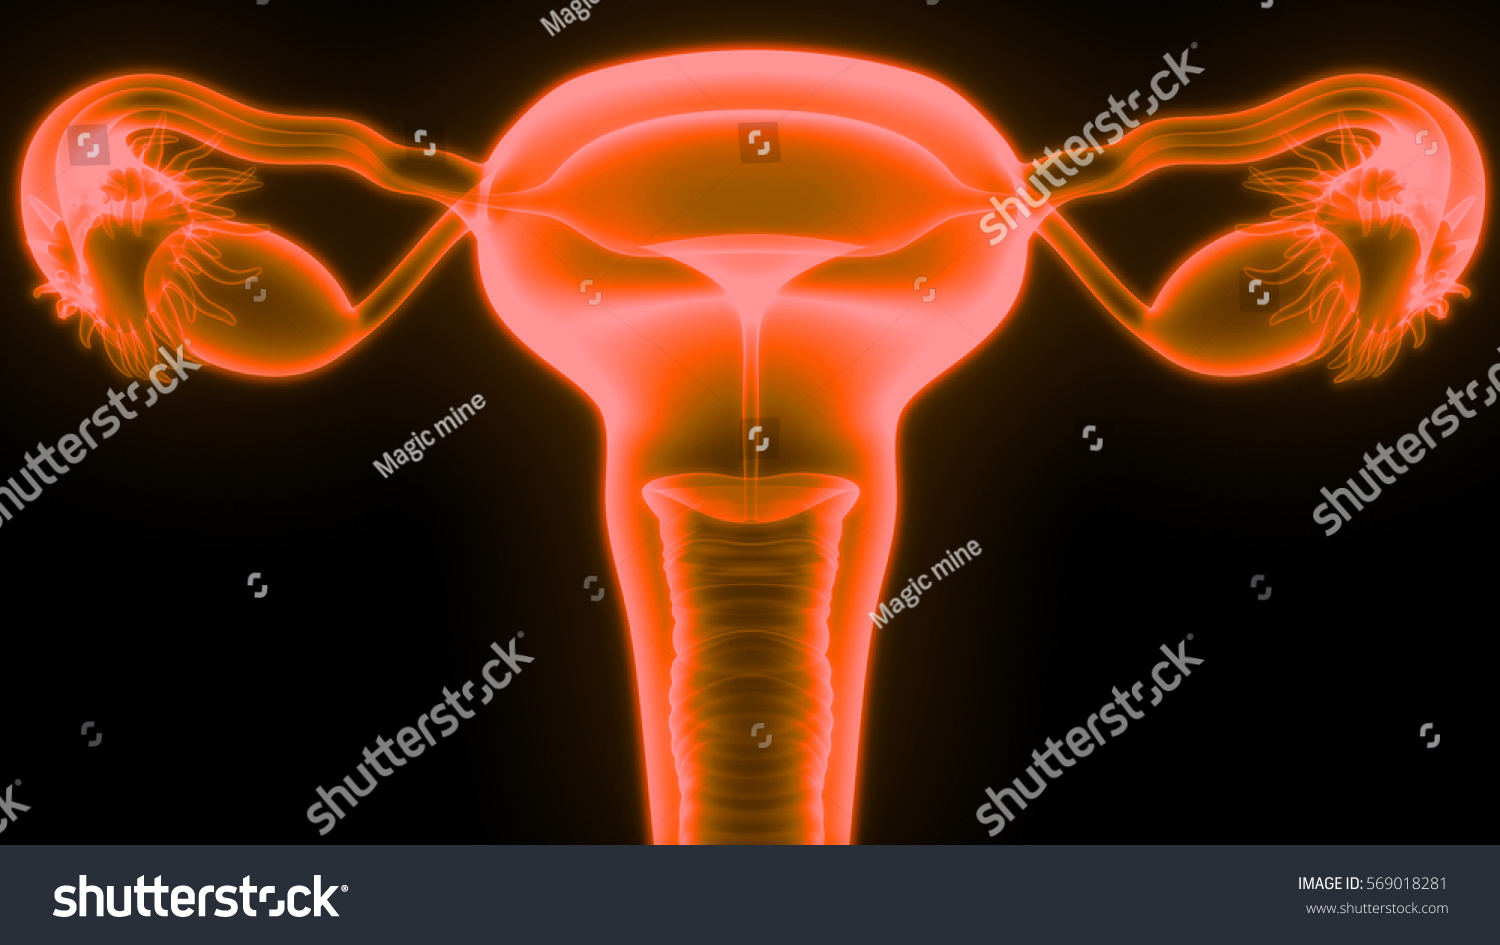 Female Reproductive System Anatomy 3d Stock Illustration 569018281 6016